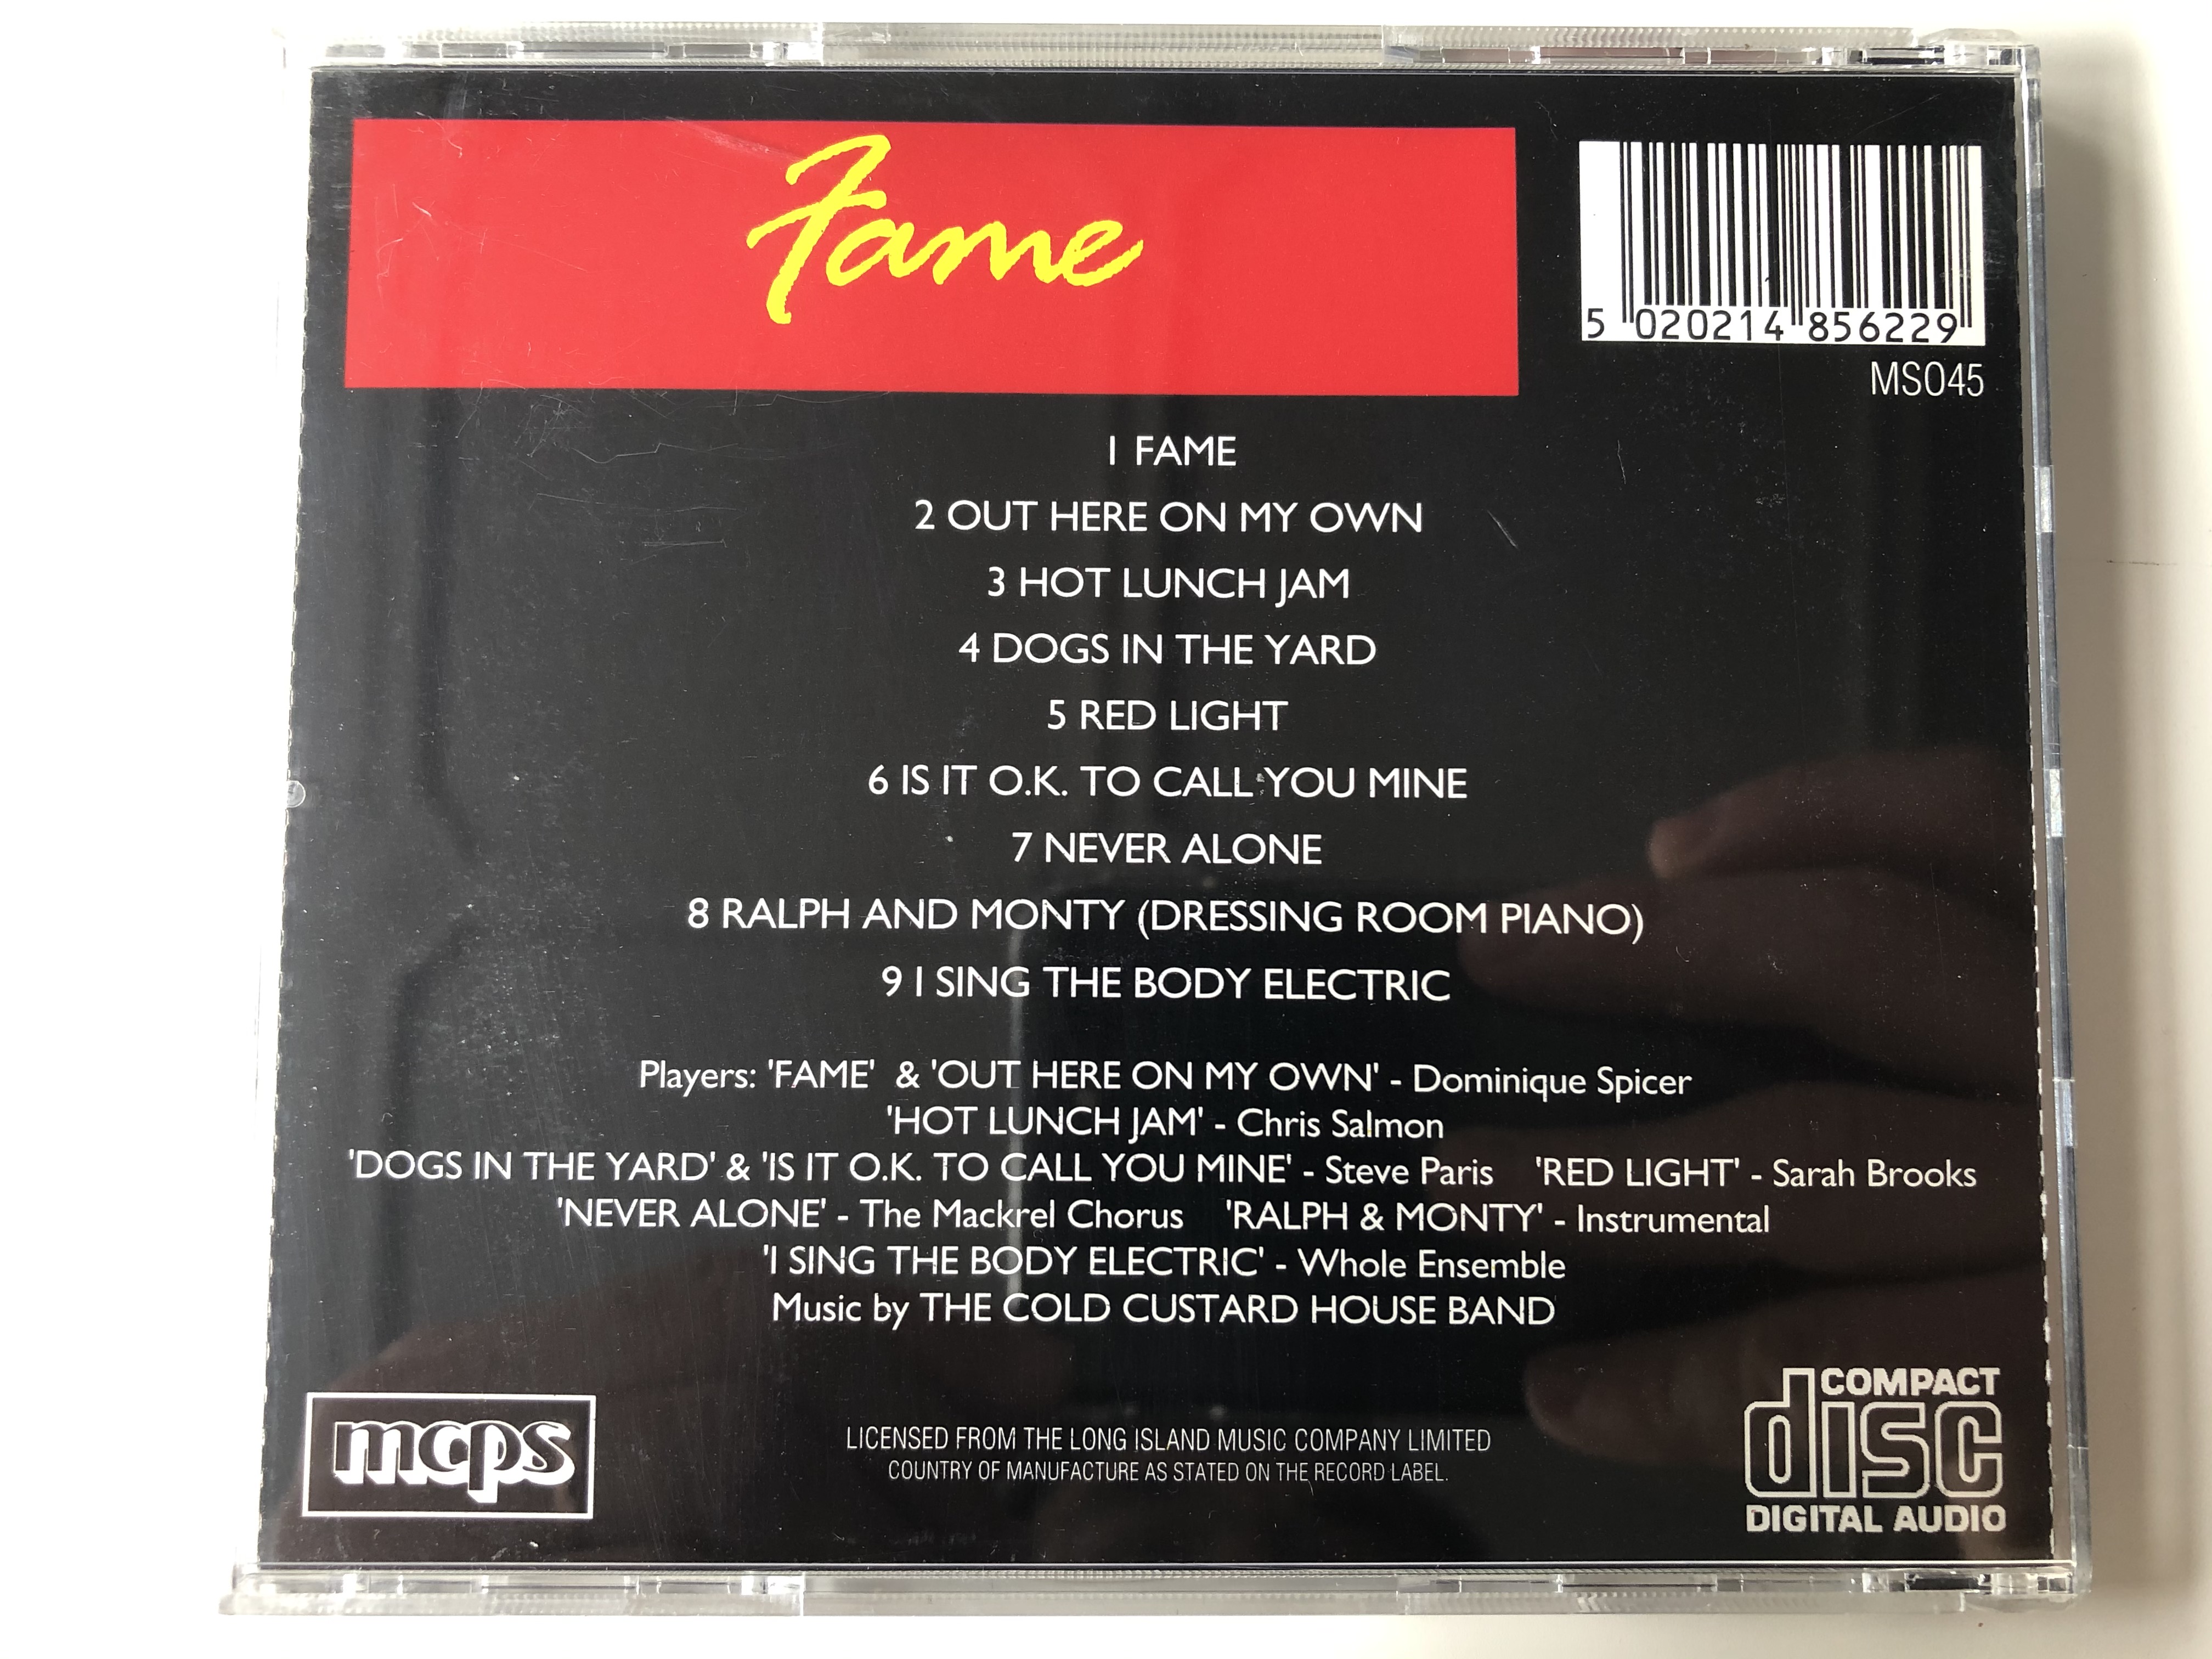 fame-pink-bruce-productions-volume-45-9-fabulous-tracks-fame-out-her-on-my-own-dogs-in-the-yard-red-light-is-it-o.k.-to-call-you-mine-ralph-and-monty-i-sing-the-body-electric-music-s-4-.jpg